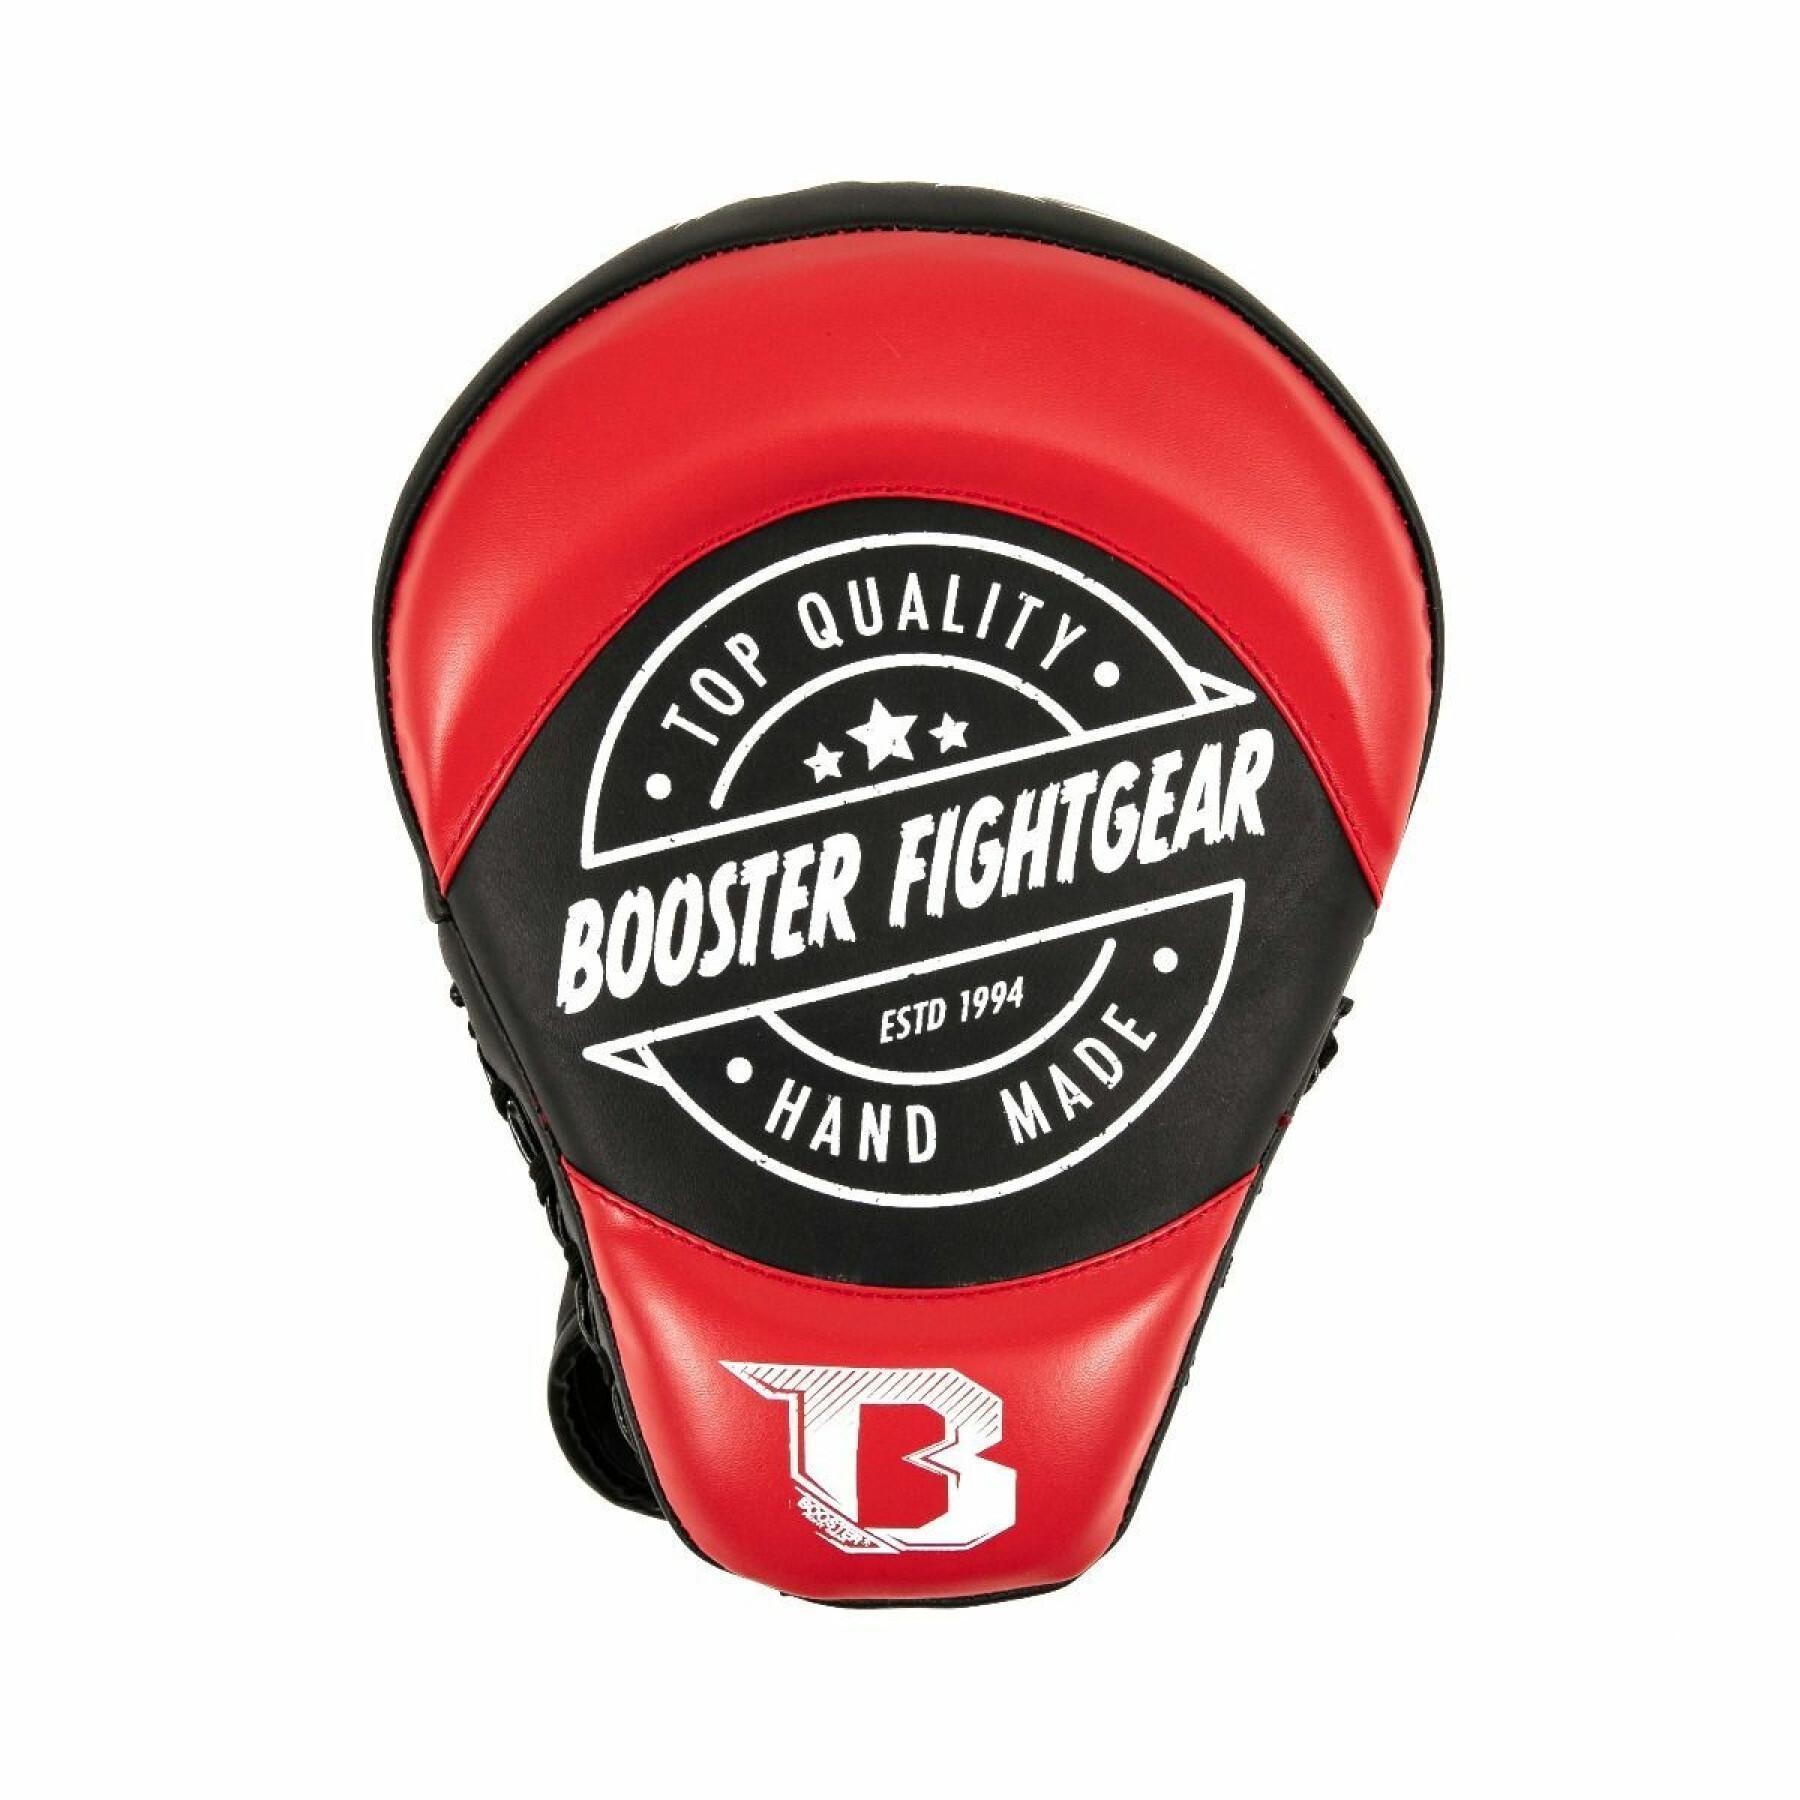 Pattes d'ours Booster Fight Gear Pml Bc 4